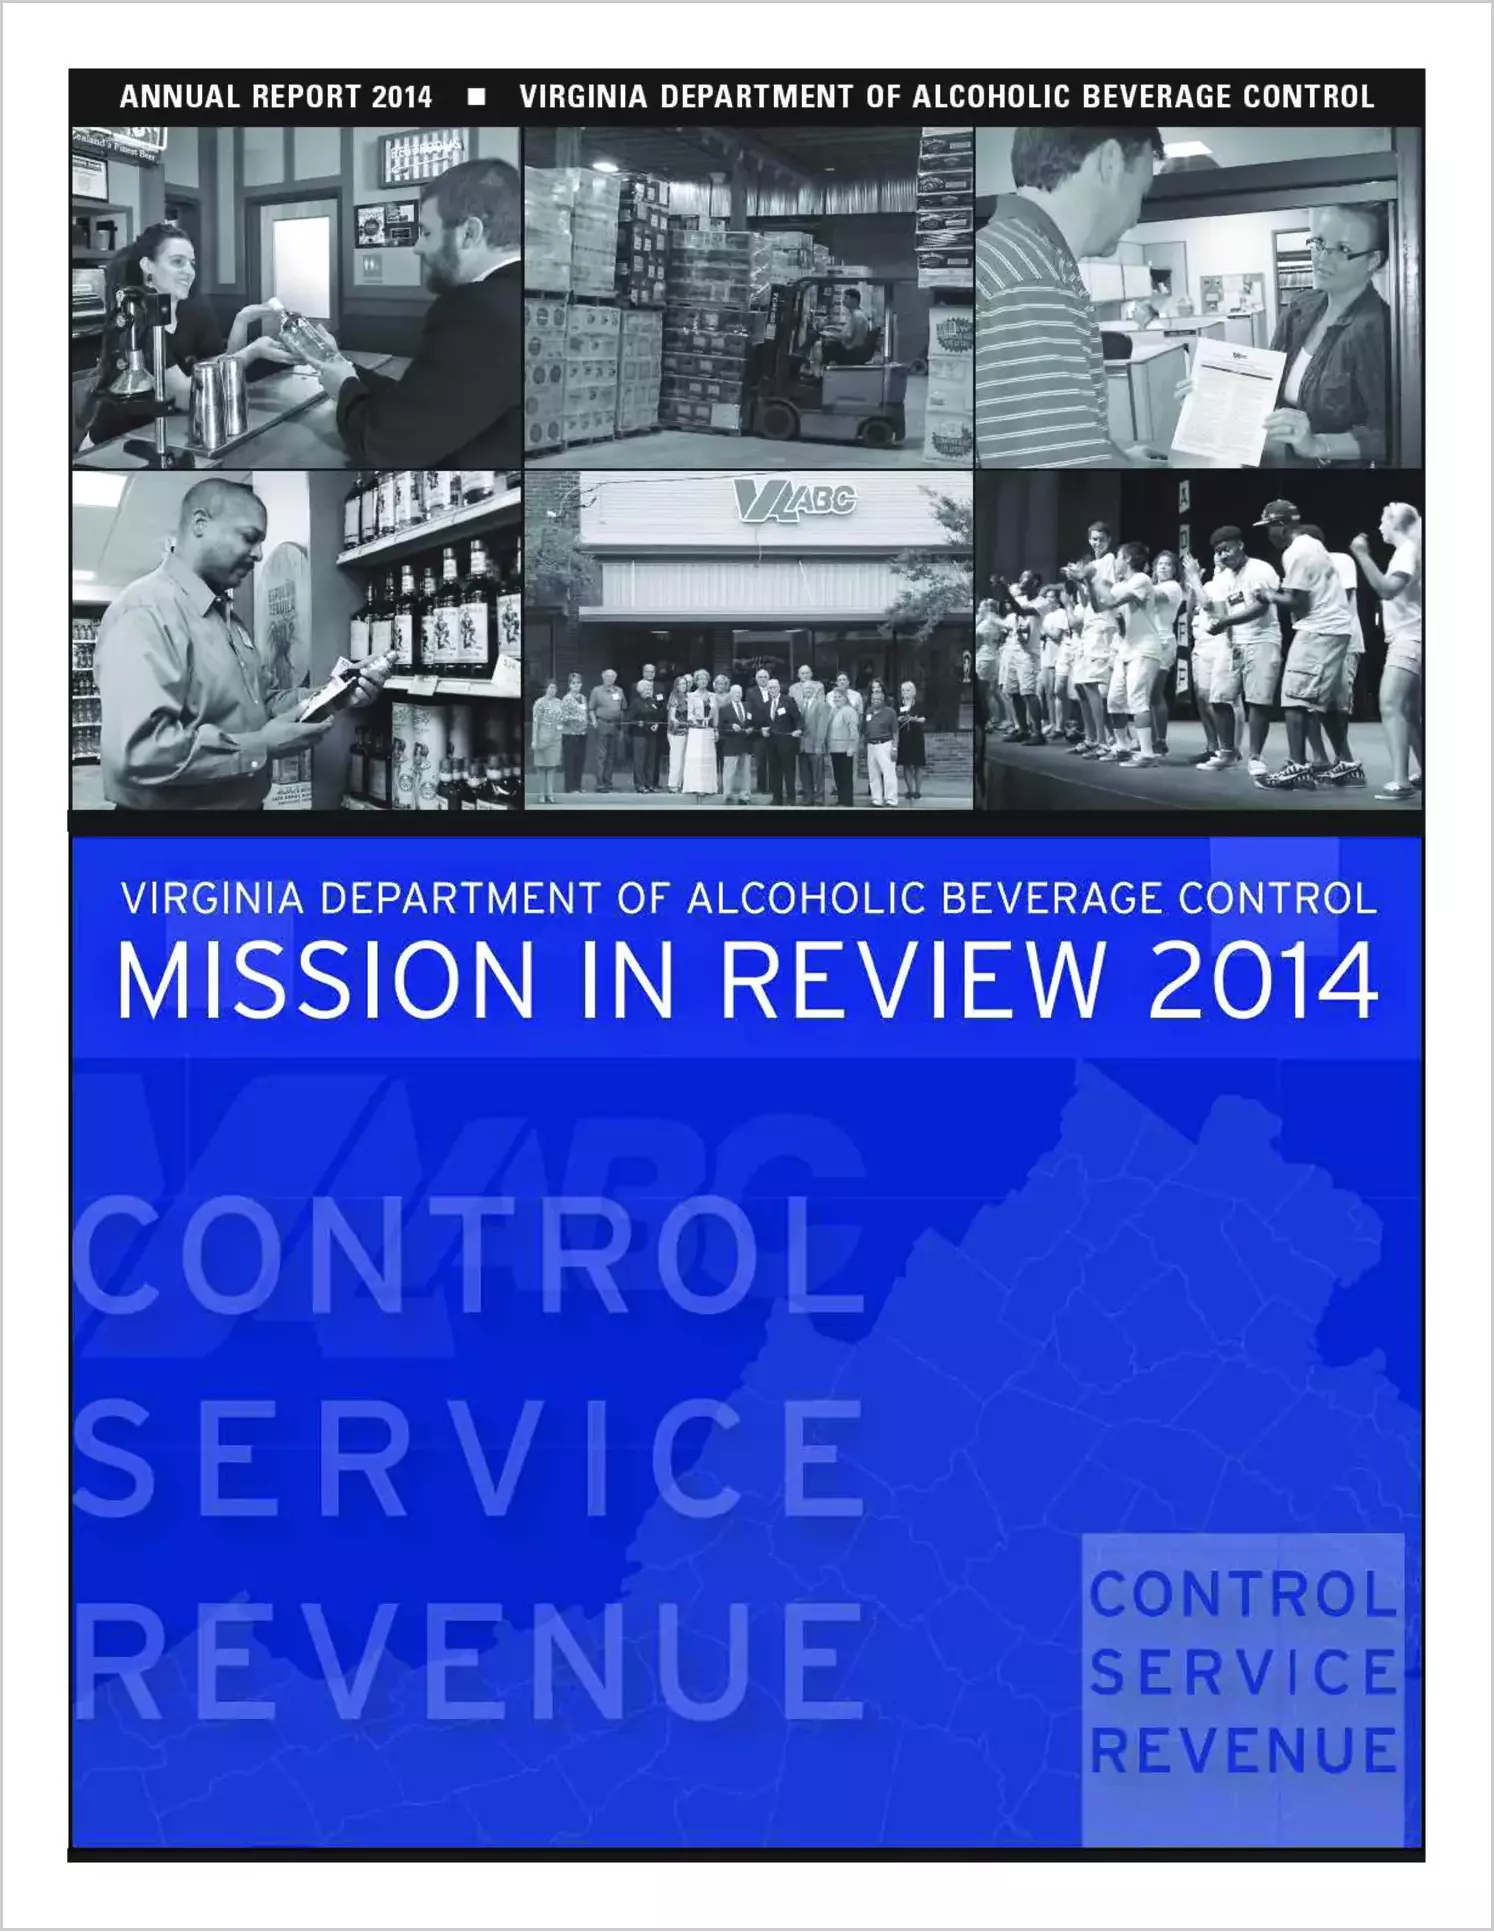 Department of Alcoholic Beverage Control Annual Report 2014